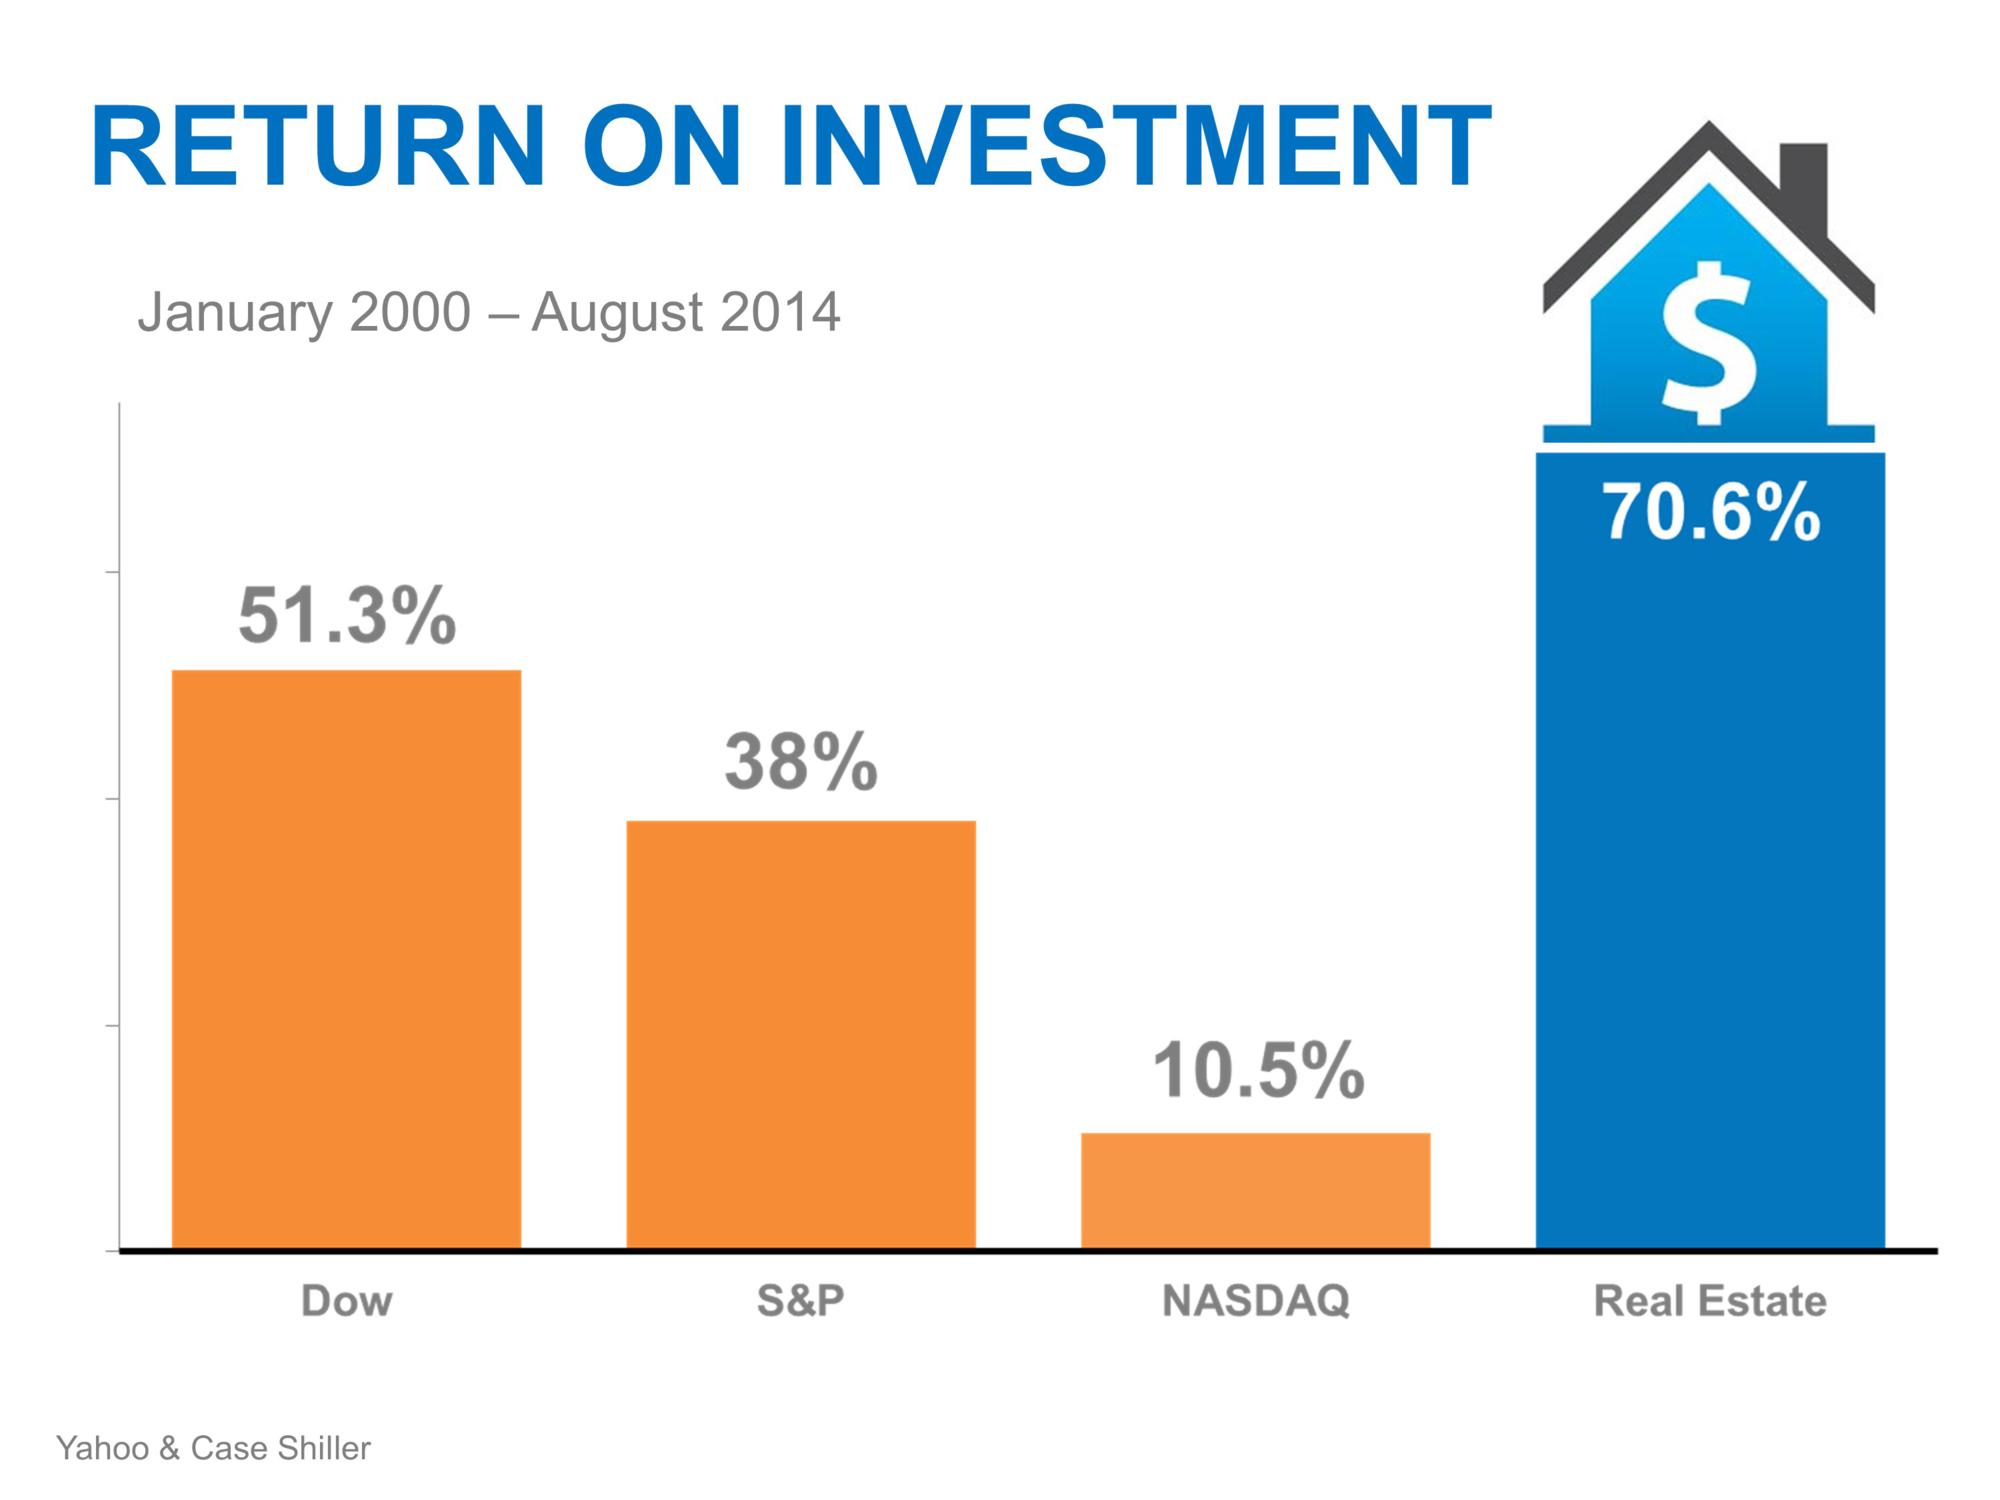 real_estate_still_did_better_than_stocks_august2014-52_2000